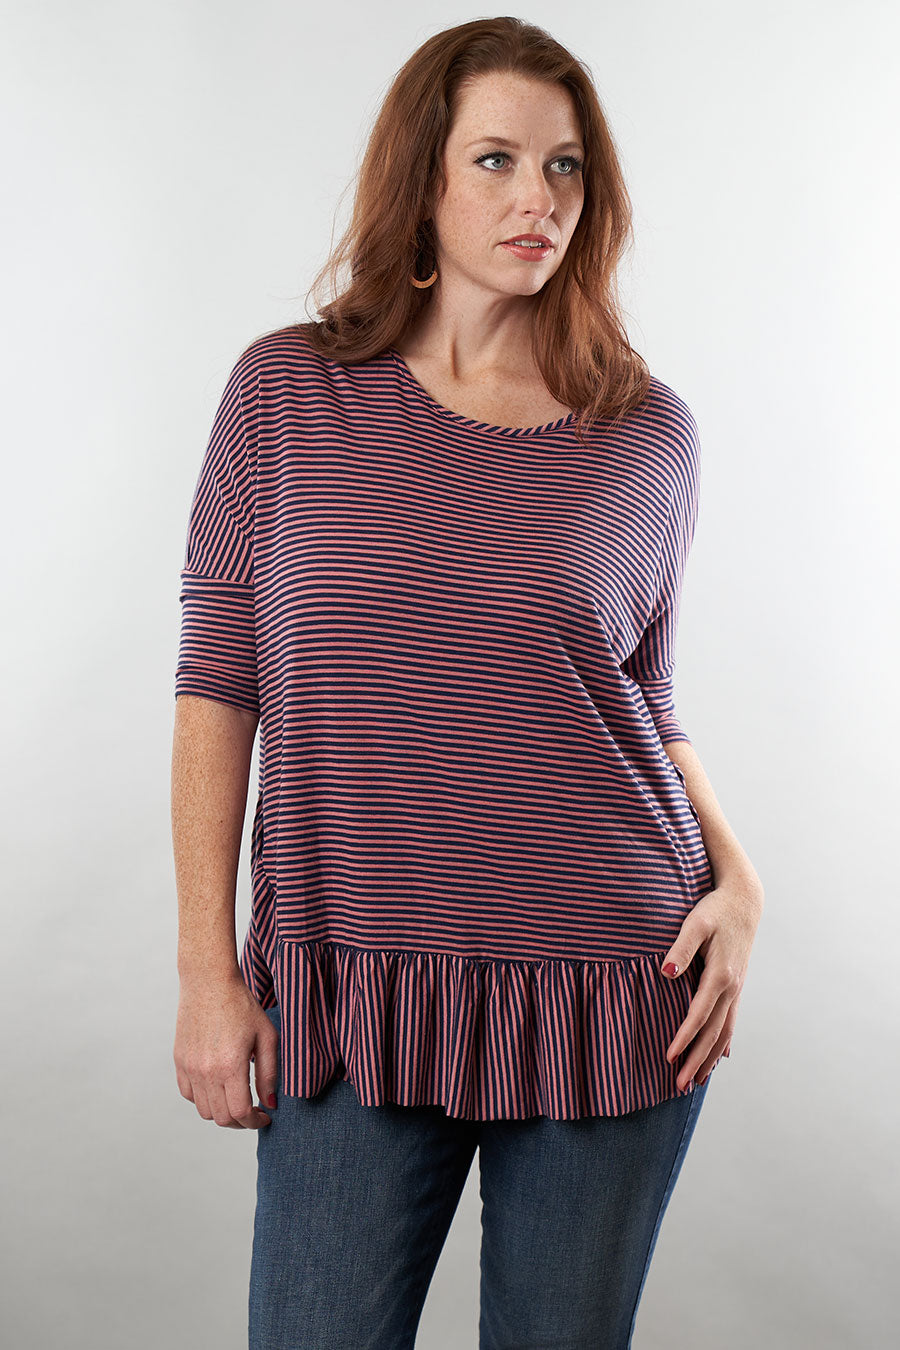 Straight &amp; Narrow Striped Top Front